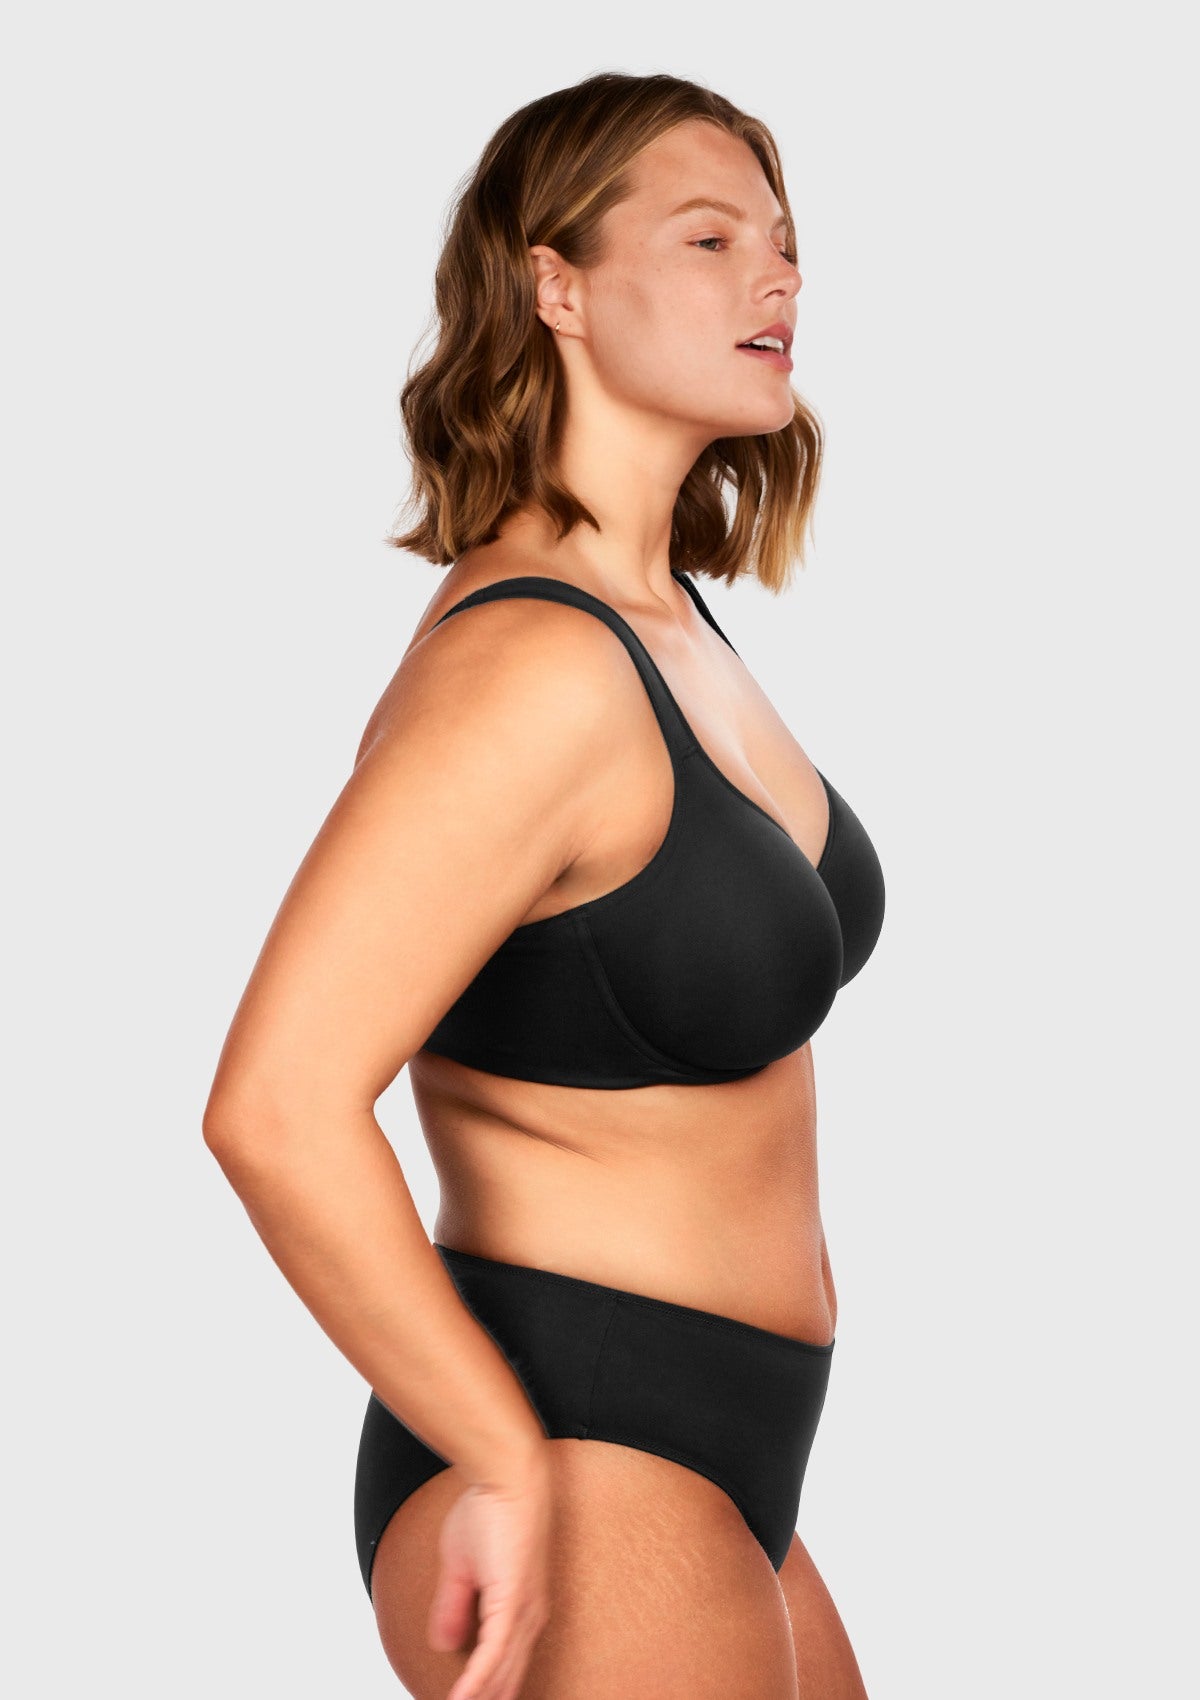 HSIA Joan Soft T-shirt Unlined Non-Padded Soft Cup Minimizer Bra - Black / 40 / G